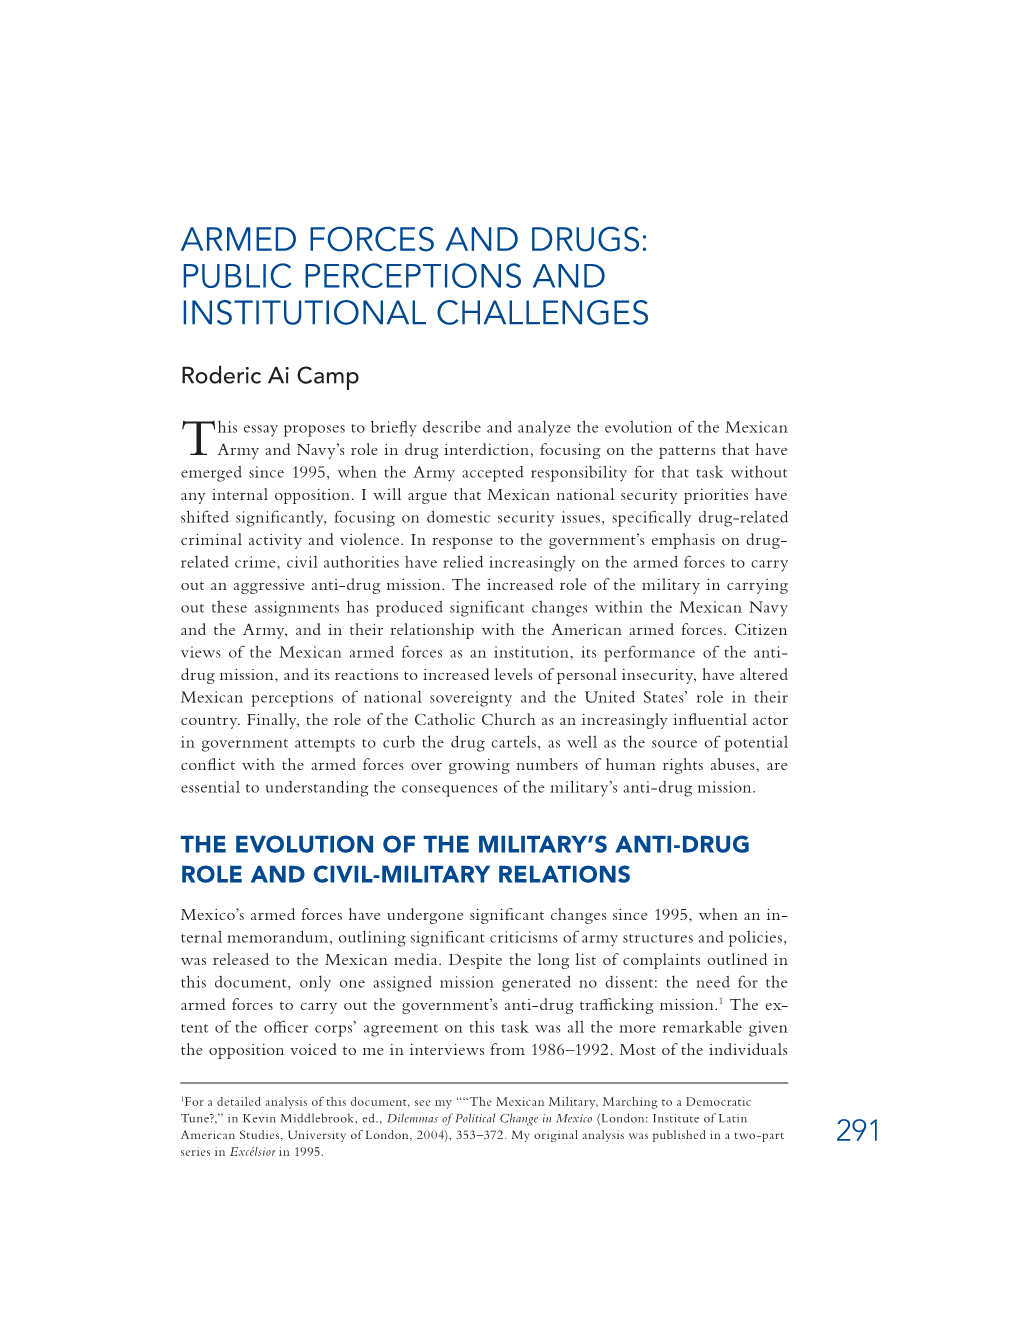 Armed Forces and Drugs: Public Perceptions and Institutional Challenges